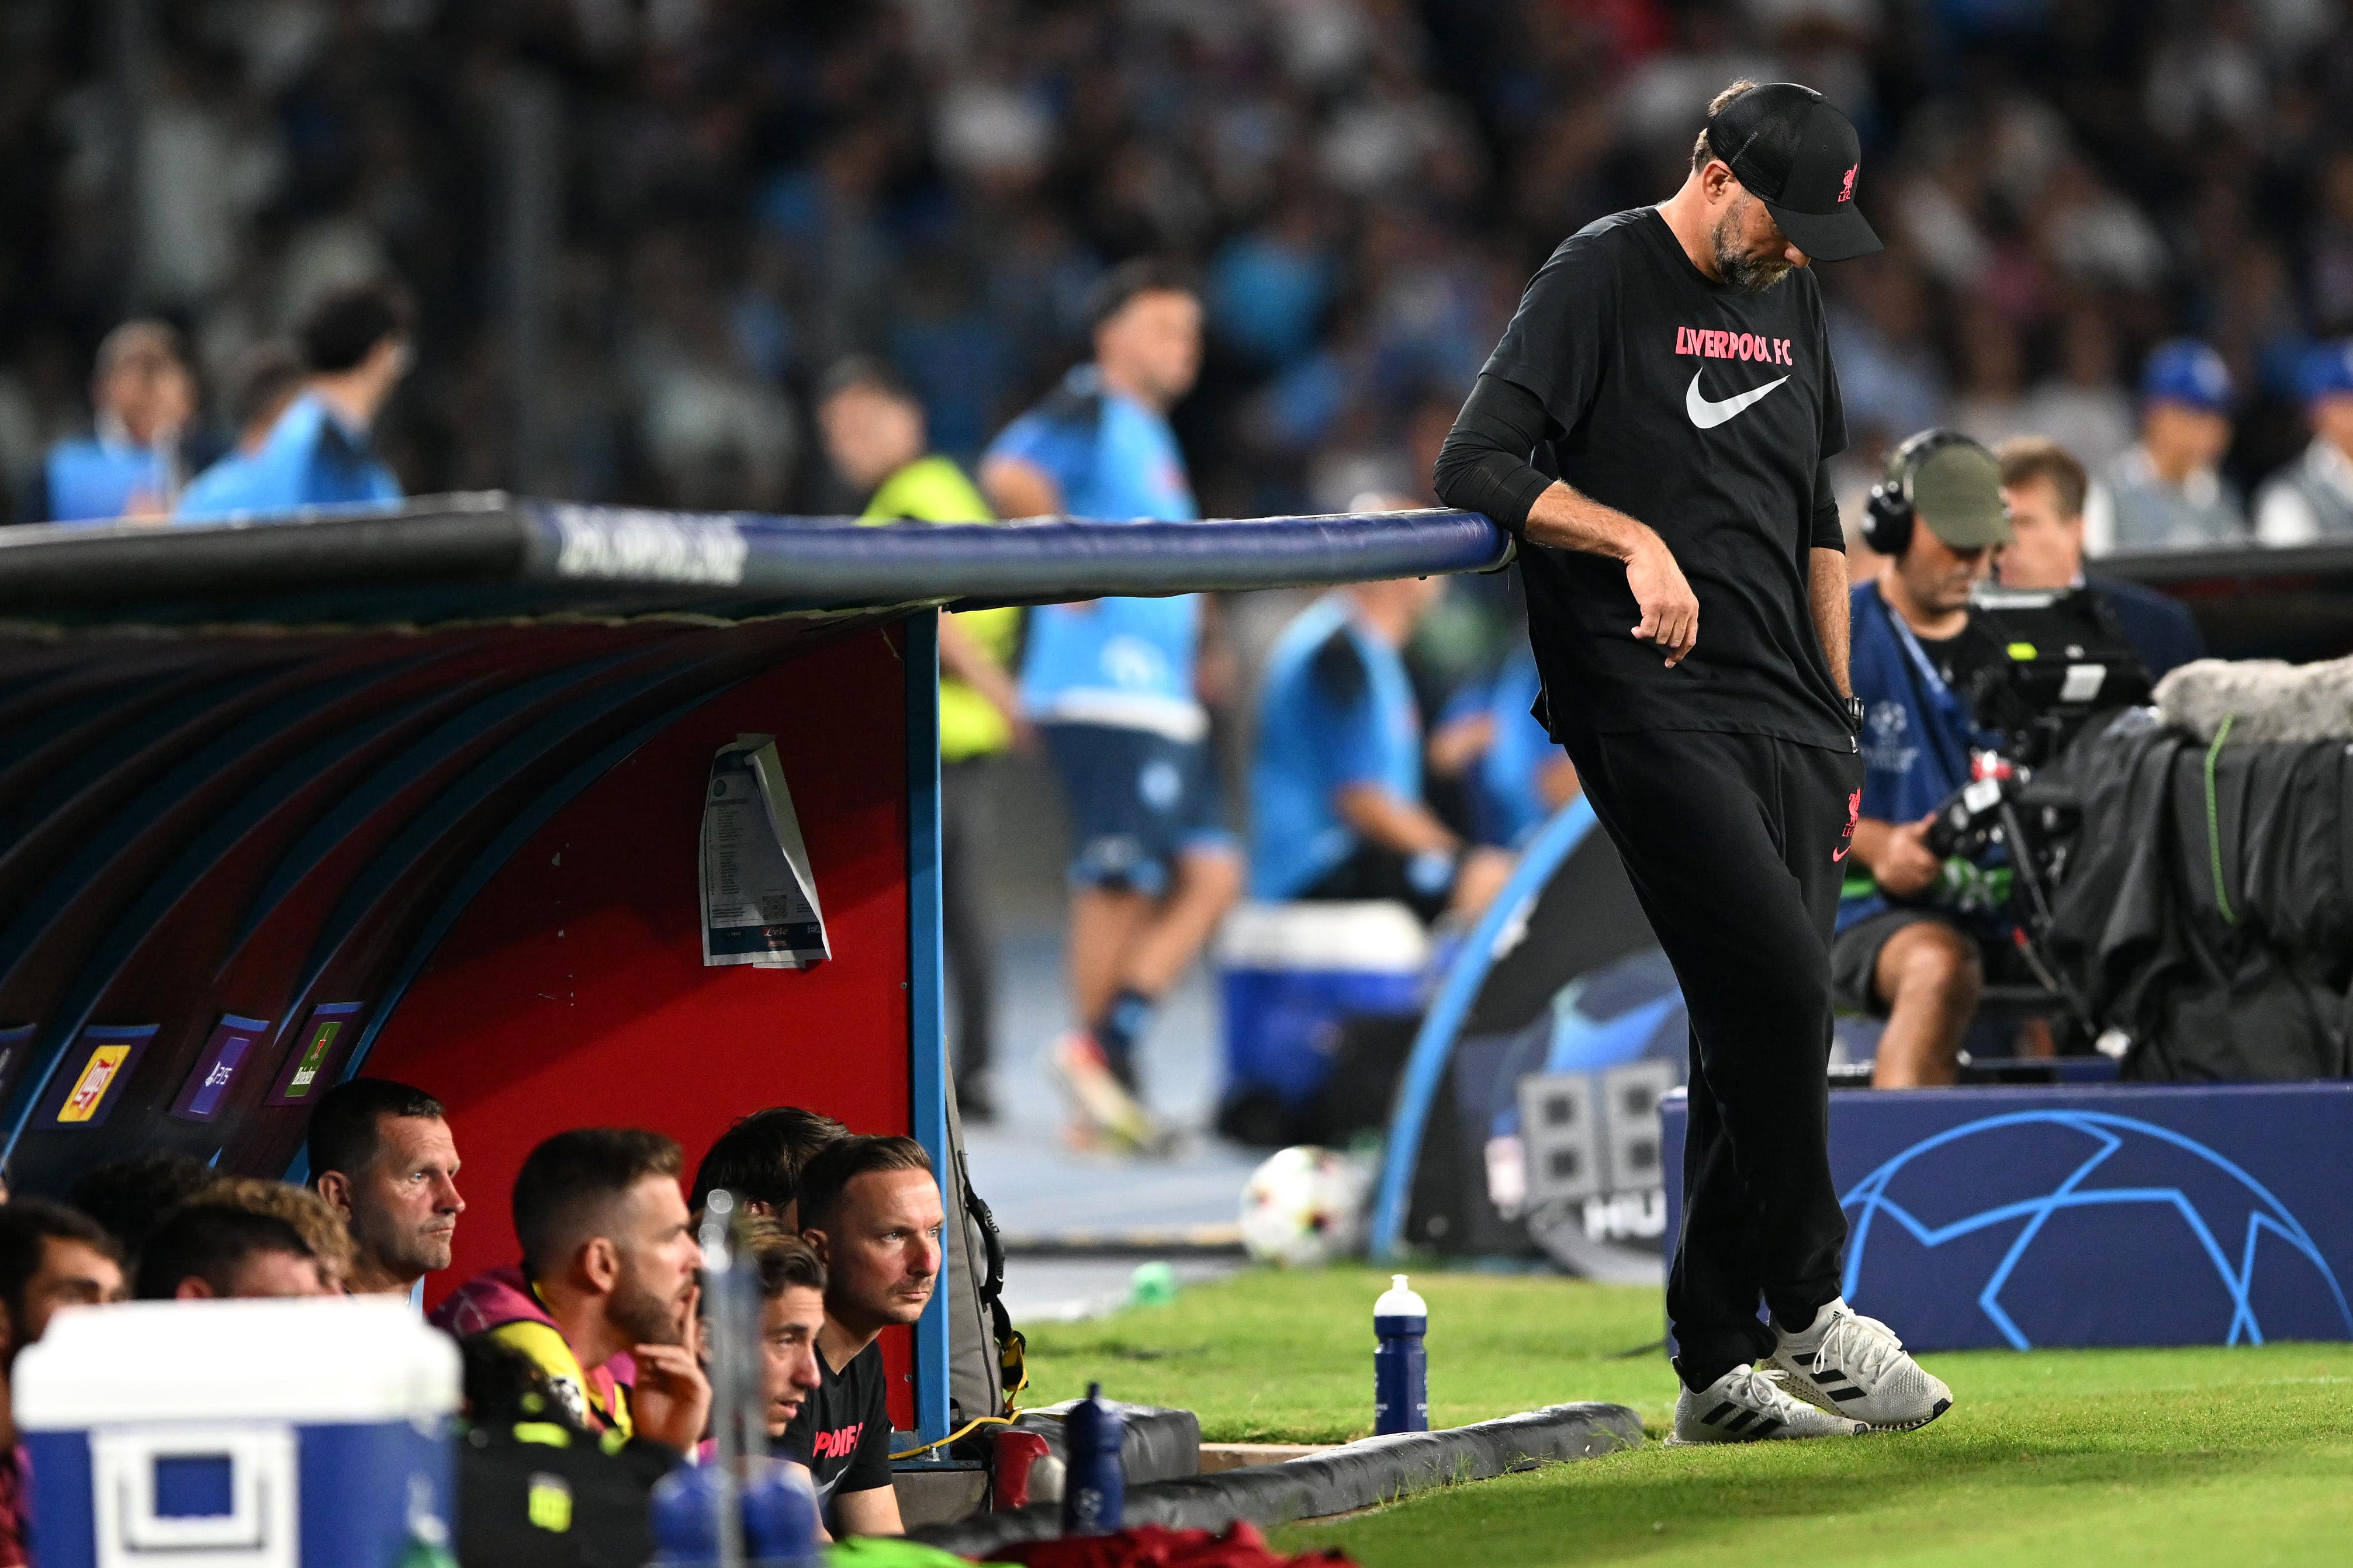 Jurgen Klopp watched on as Liverpool were outplayed by Napoli